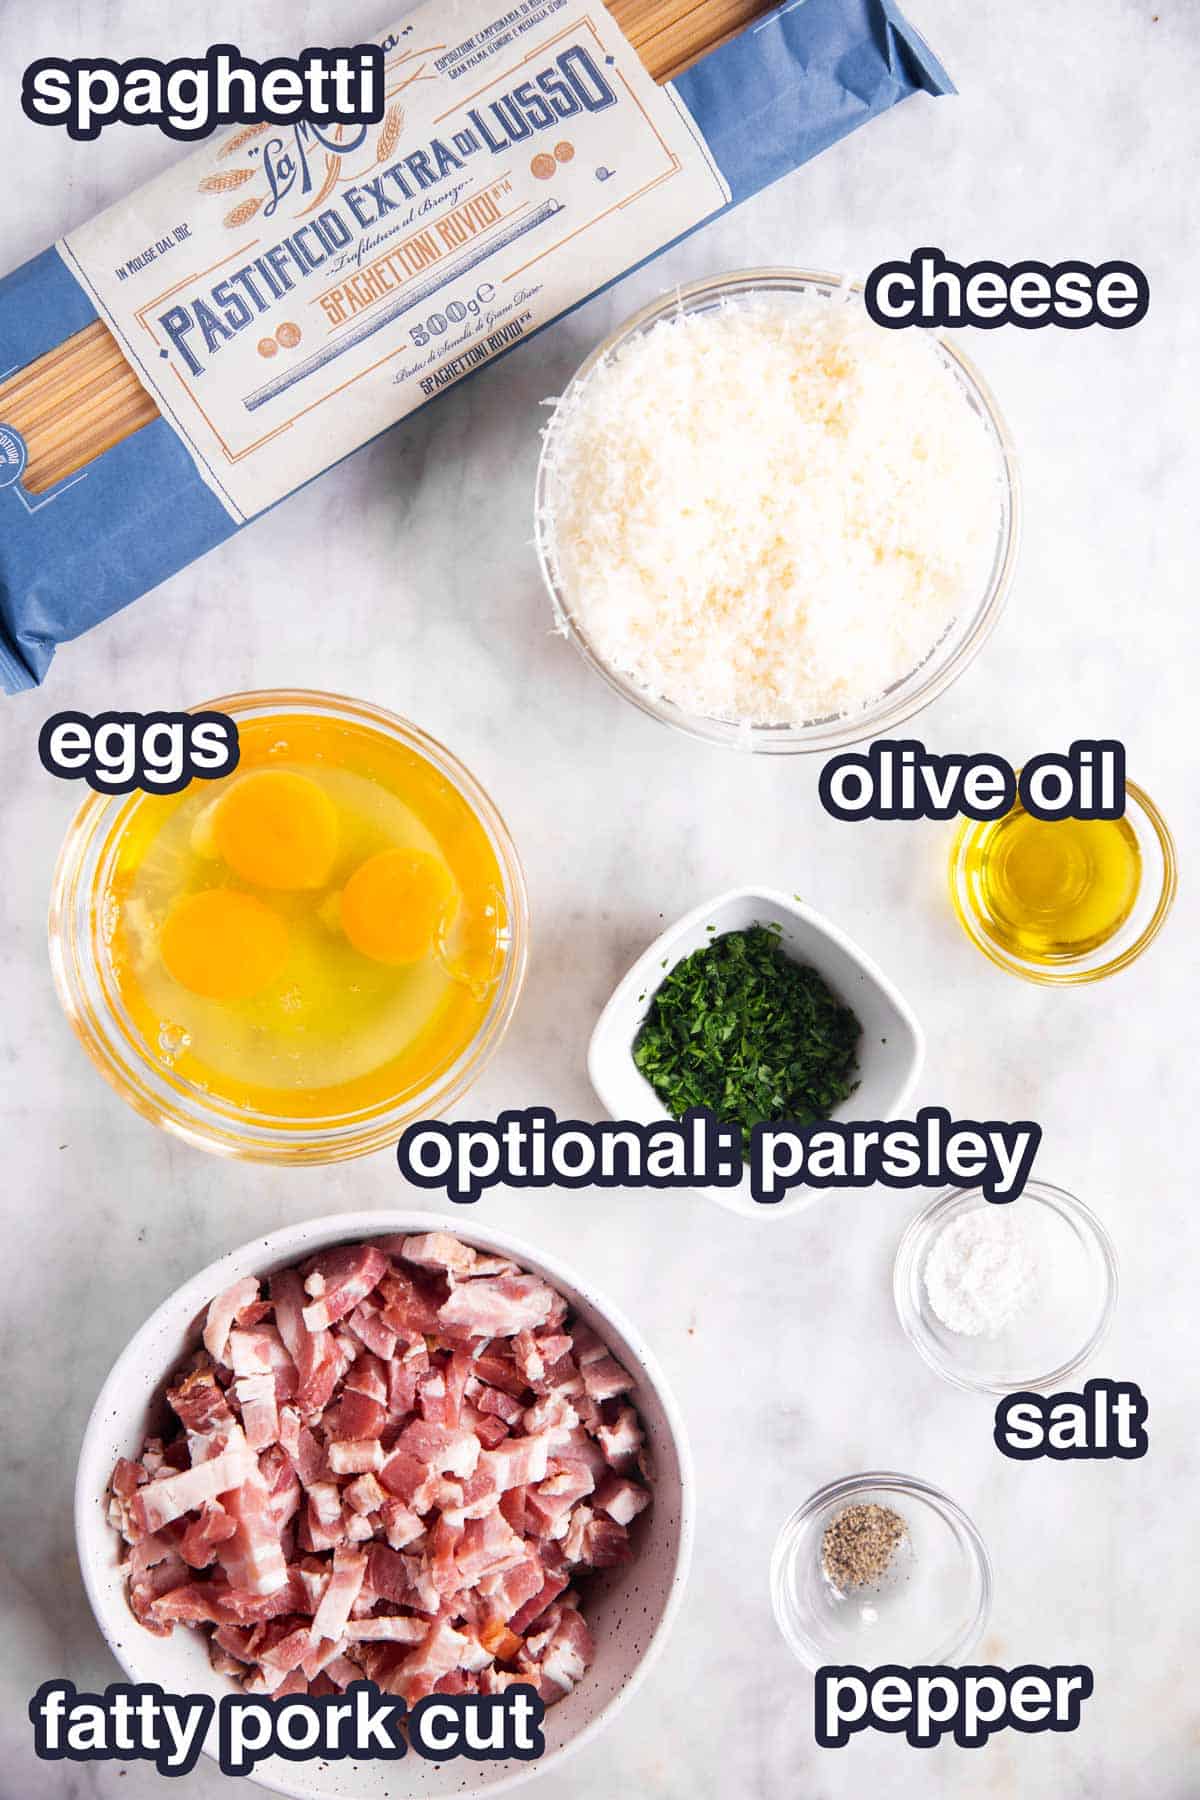 ingredients for spaghetti carbonara with text labels